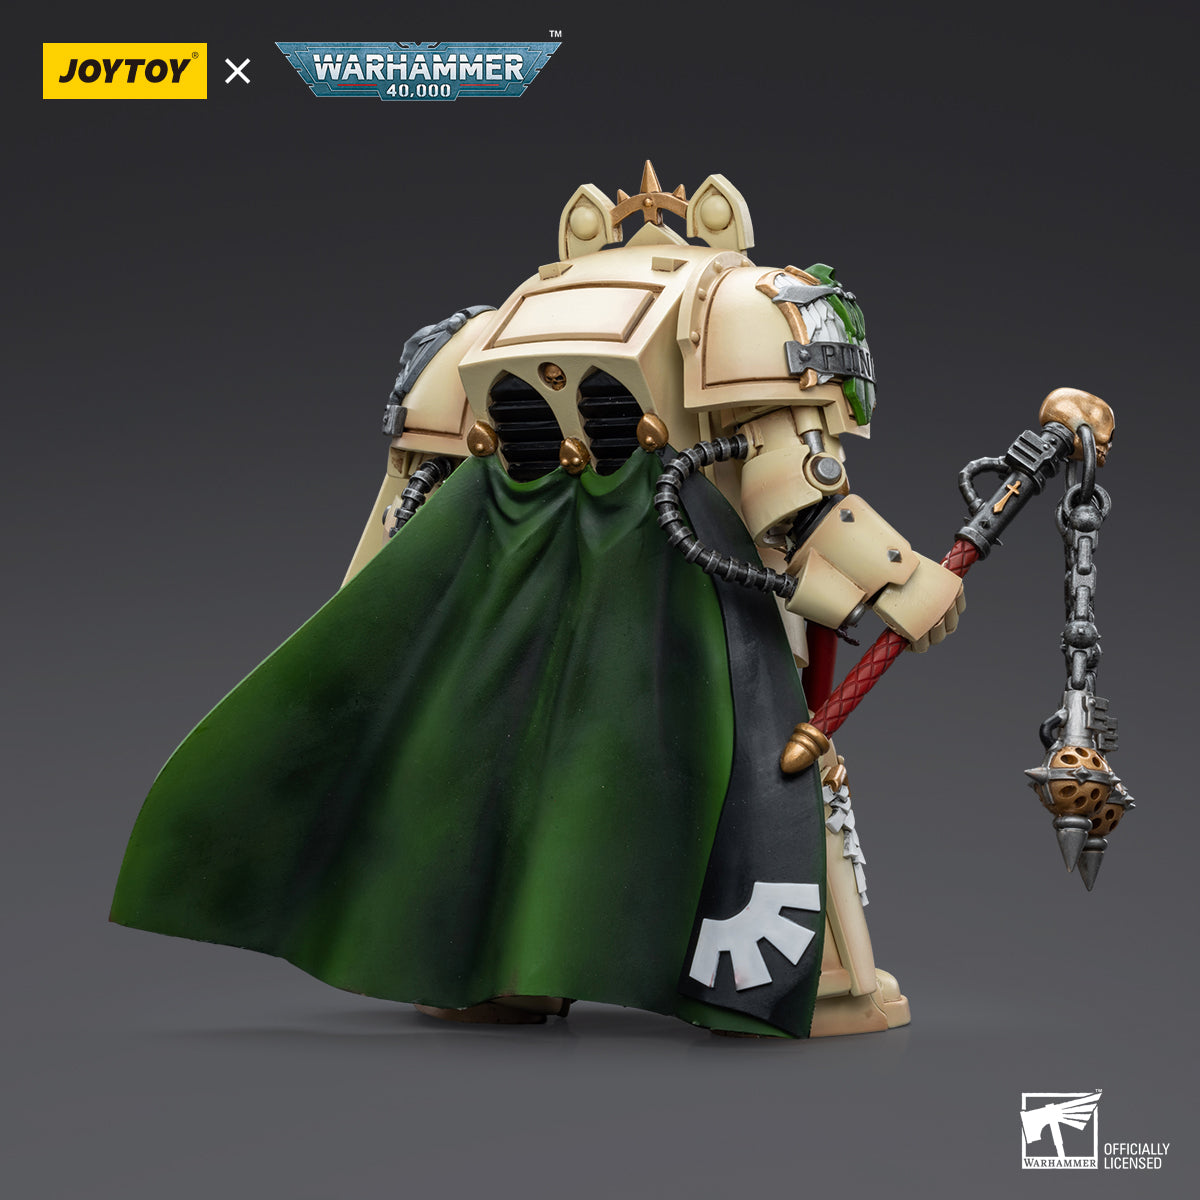 Warhammer Collectibles: 1/18 Scale Dark Angels Deathwing Knight Master with Flail of the Unforgiven